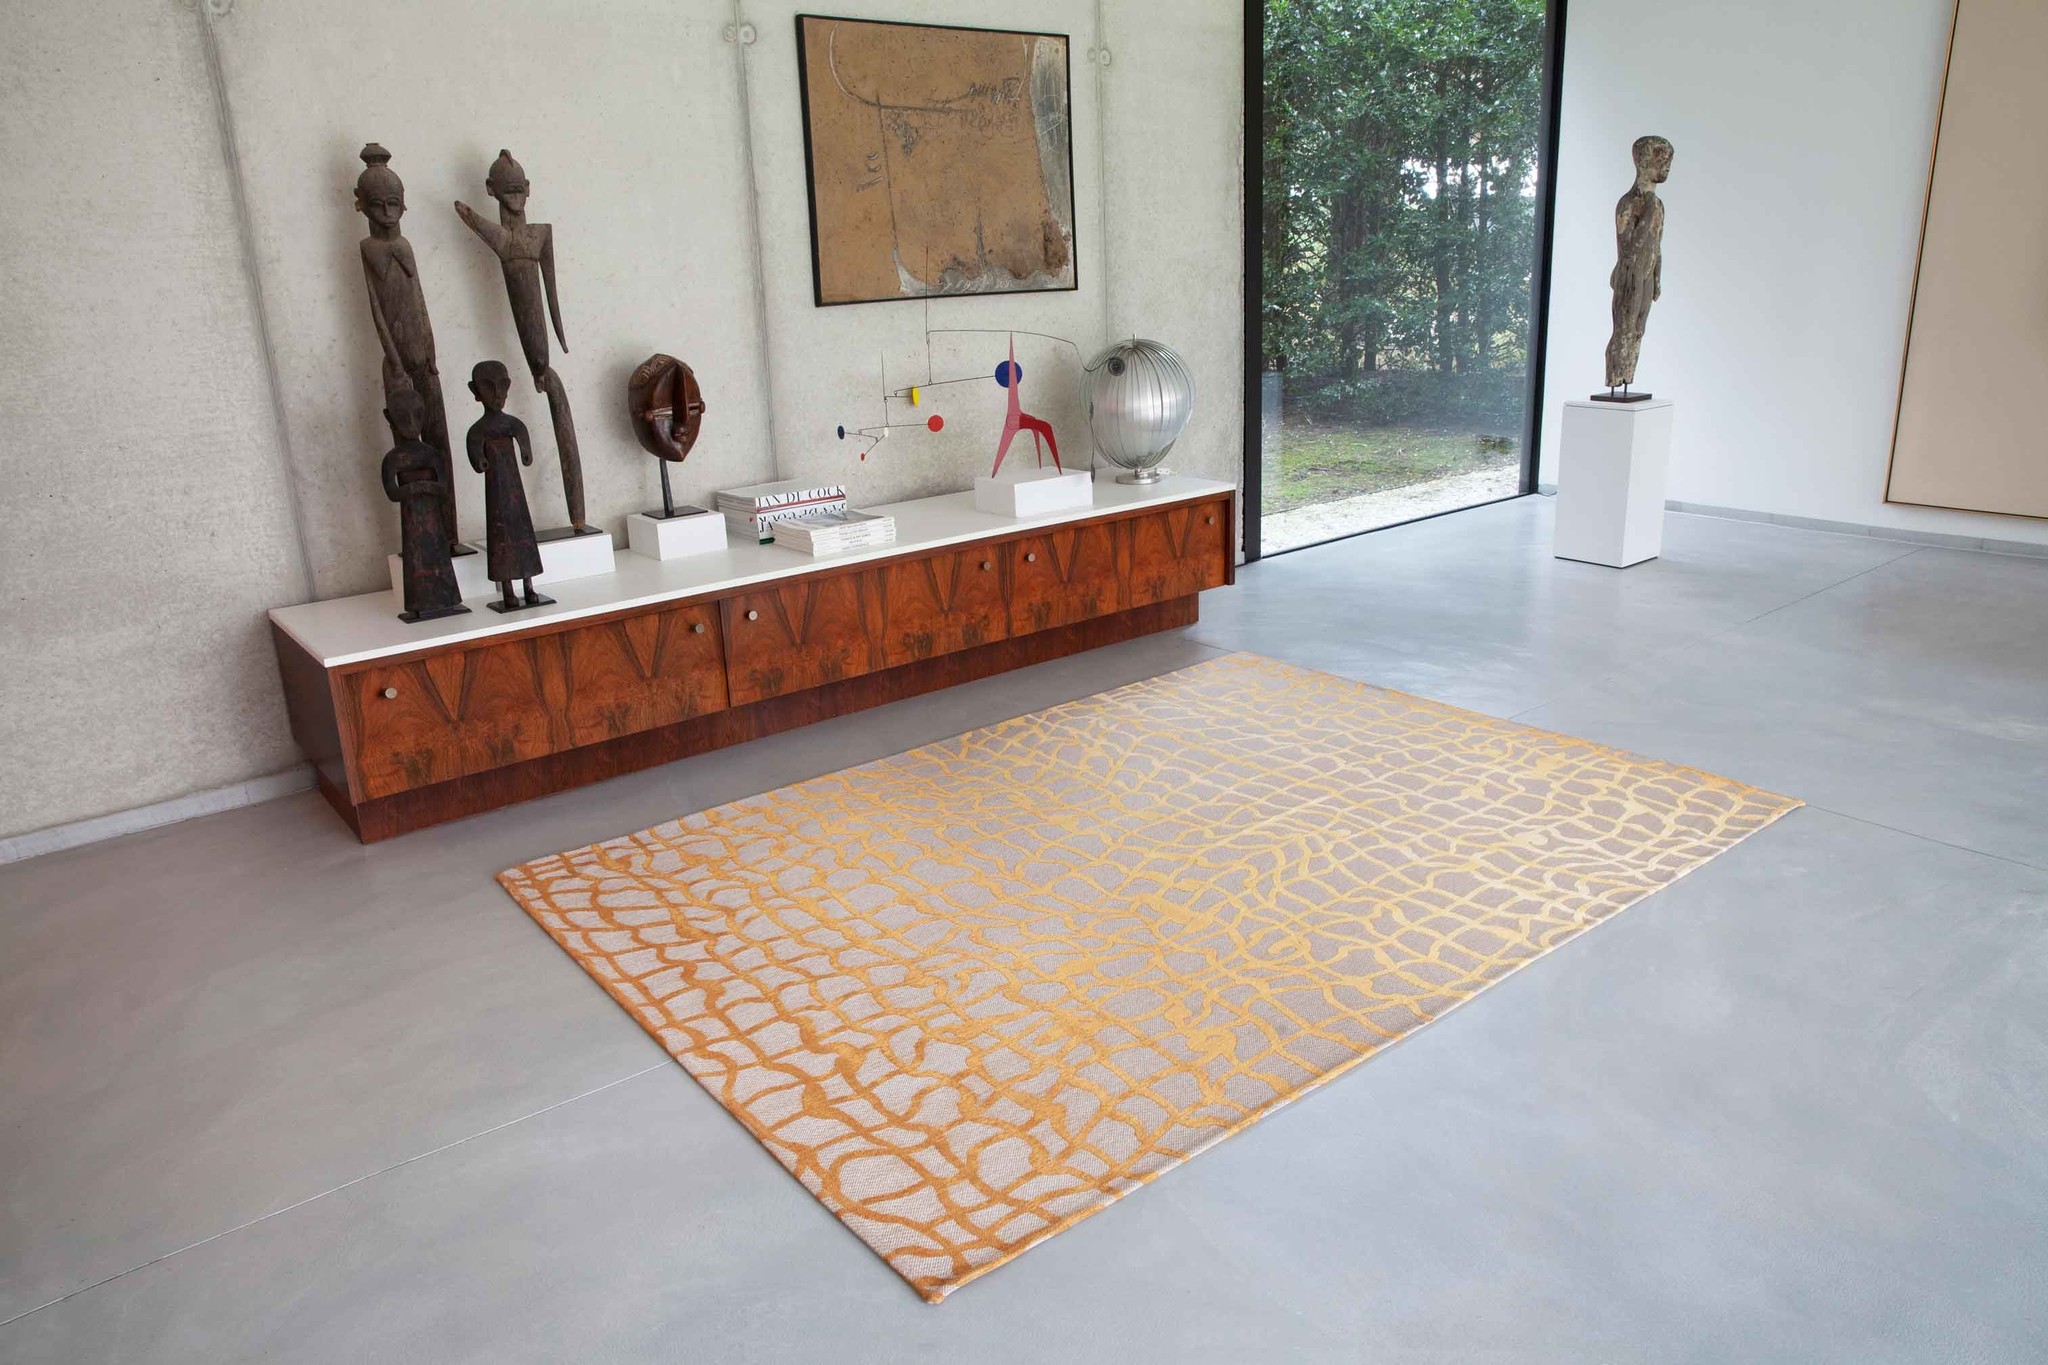 Gold Flatwoven Rug ☞ Size: 2' 7" x 5' (80 x 150 cm)